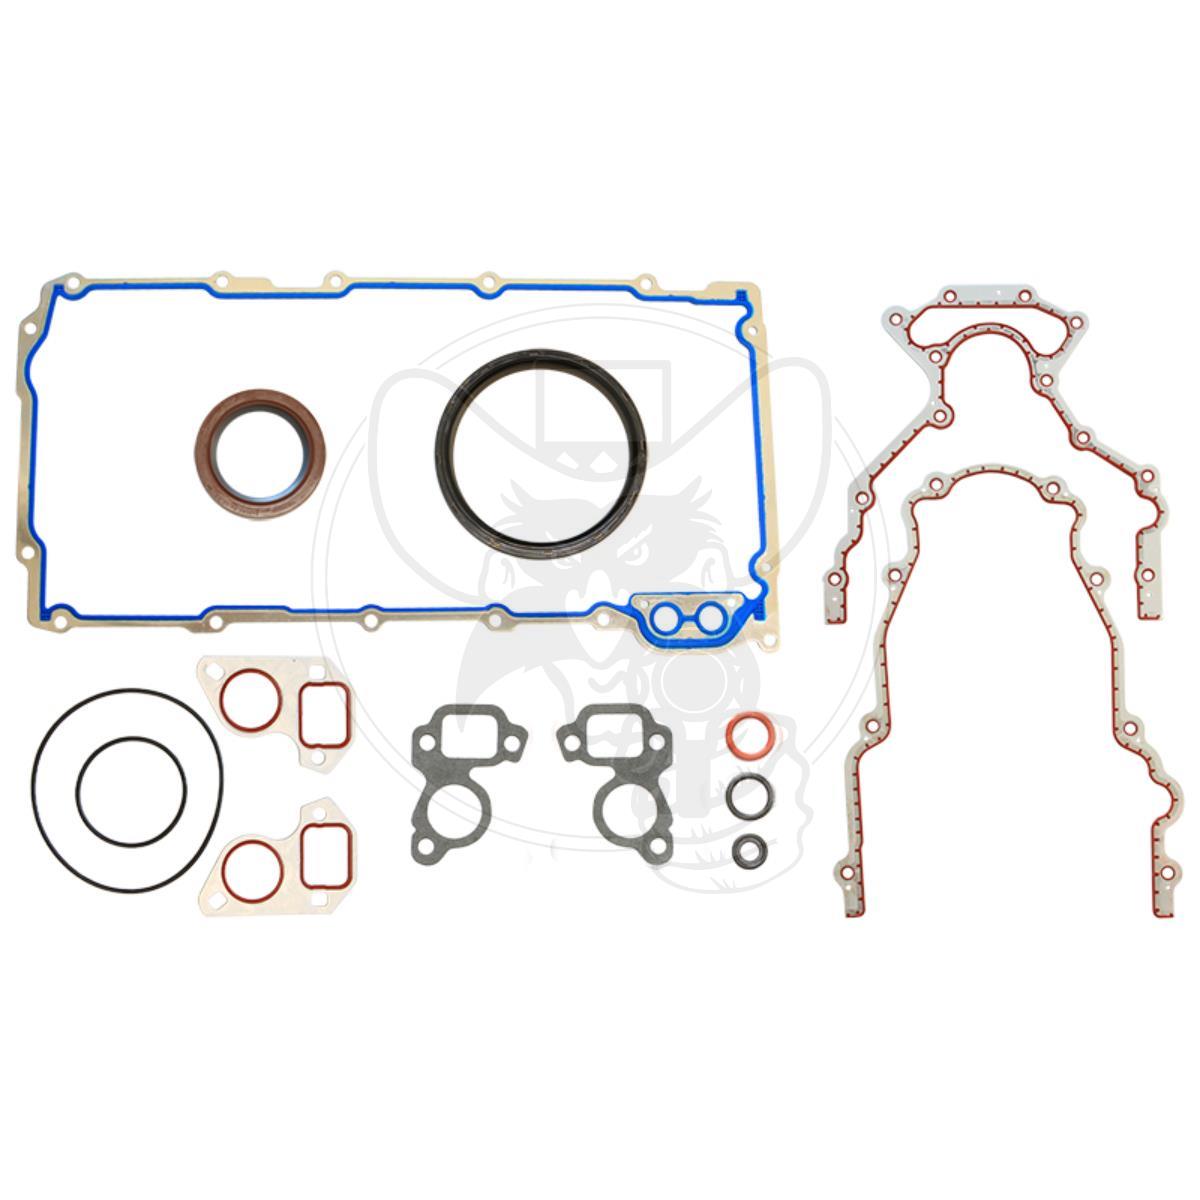 5R RACING ENGINE GASKET CONVERSION SET FITS CHEV COMMODORE LS1-2